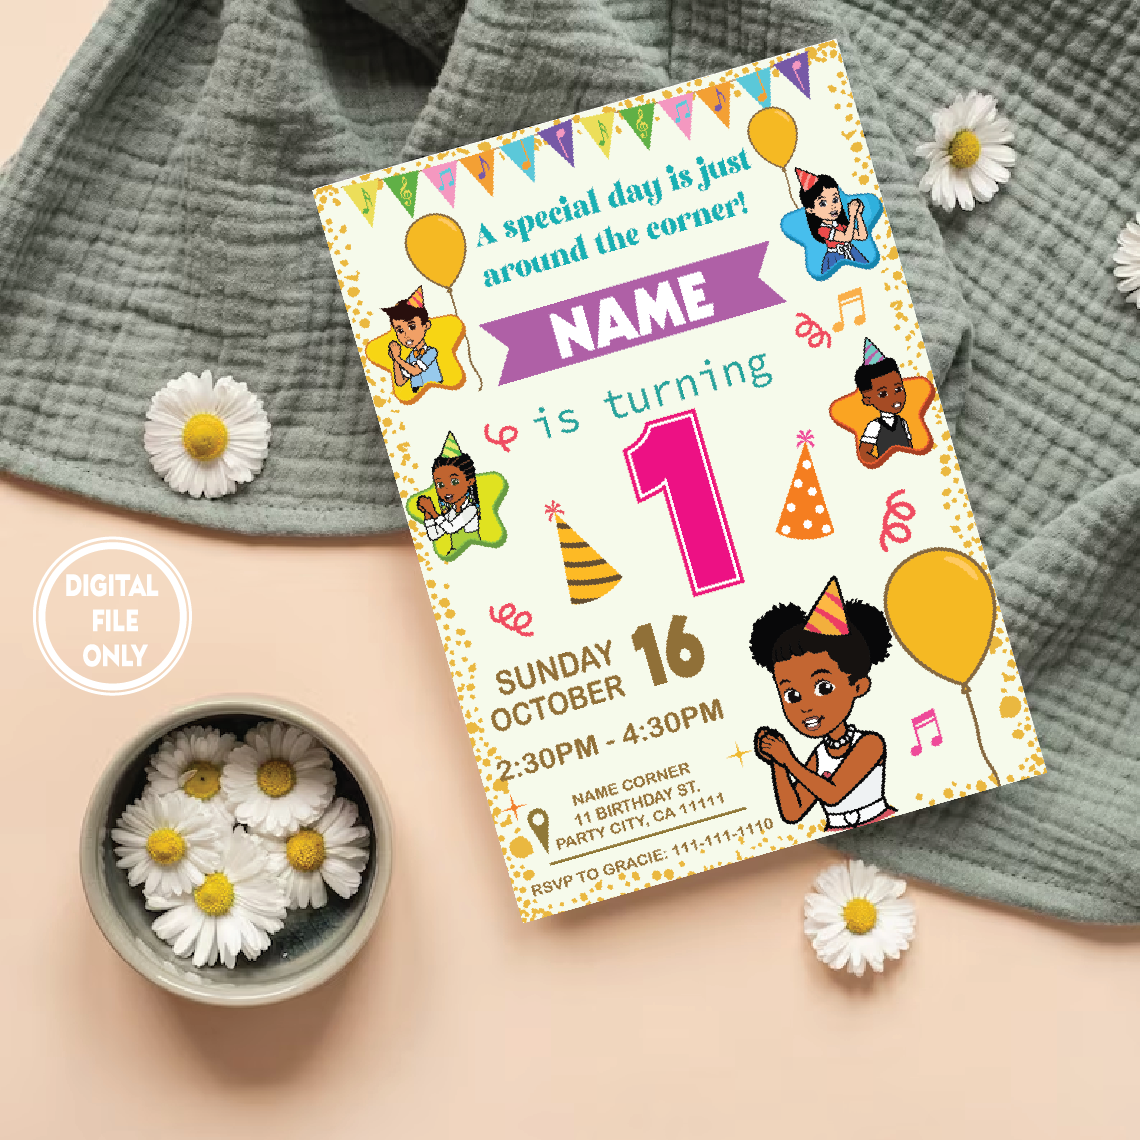 Personalized File Kids Digital Birthday Invitation, Gracies Corner Party Invitation, Gracie's Corner Birthday Invitation, Gracies Corner svg, svg, png, dxf PNG File Only